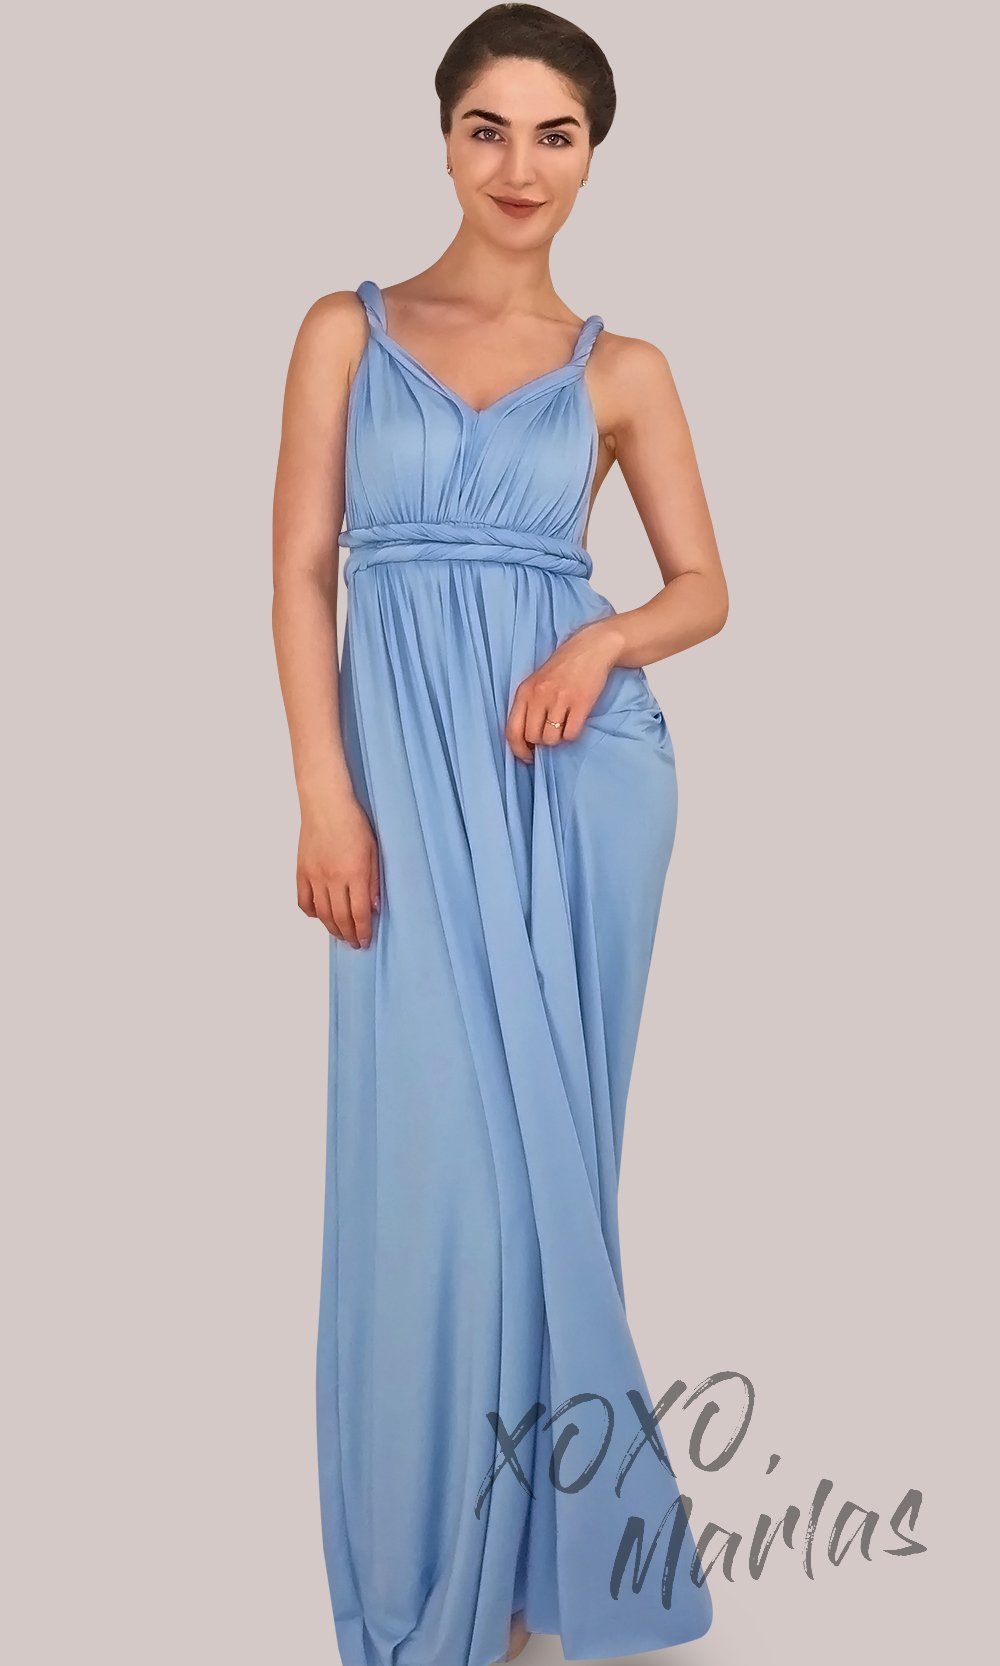 Long periwinkle blue infinity bridesmaid dress or multiway dress or convertible dress.One dress worn in multiple ways.This light blue one size dress is great for bridesmaid, prom, destination wedding, gala, cheap western party dress, semi formal